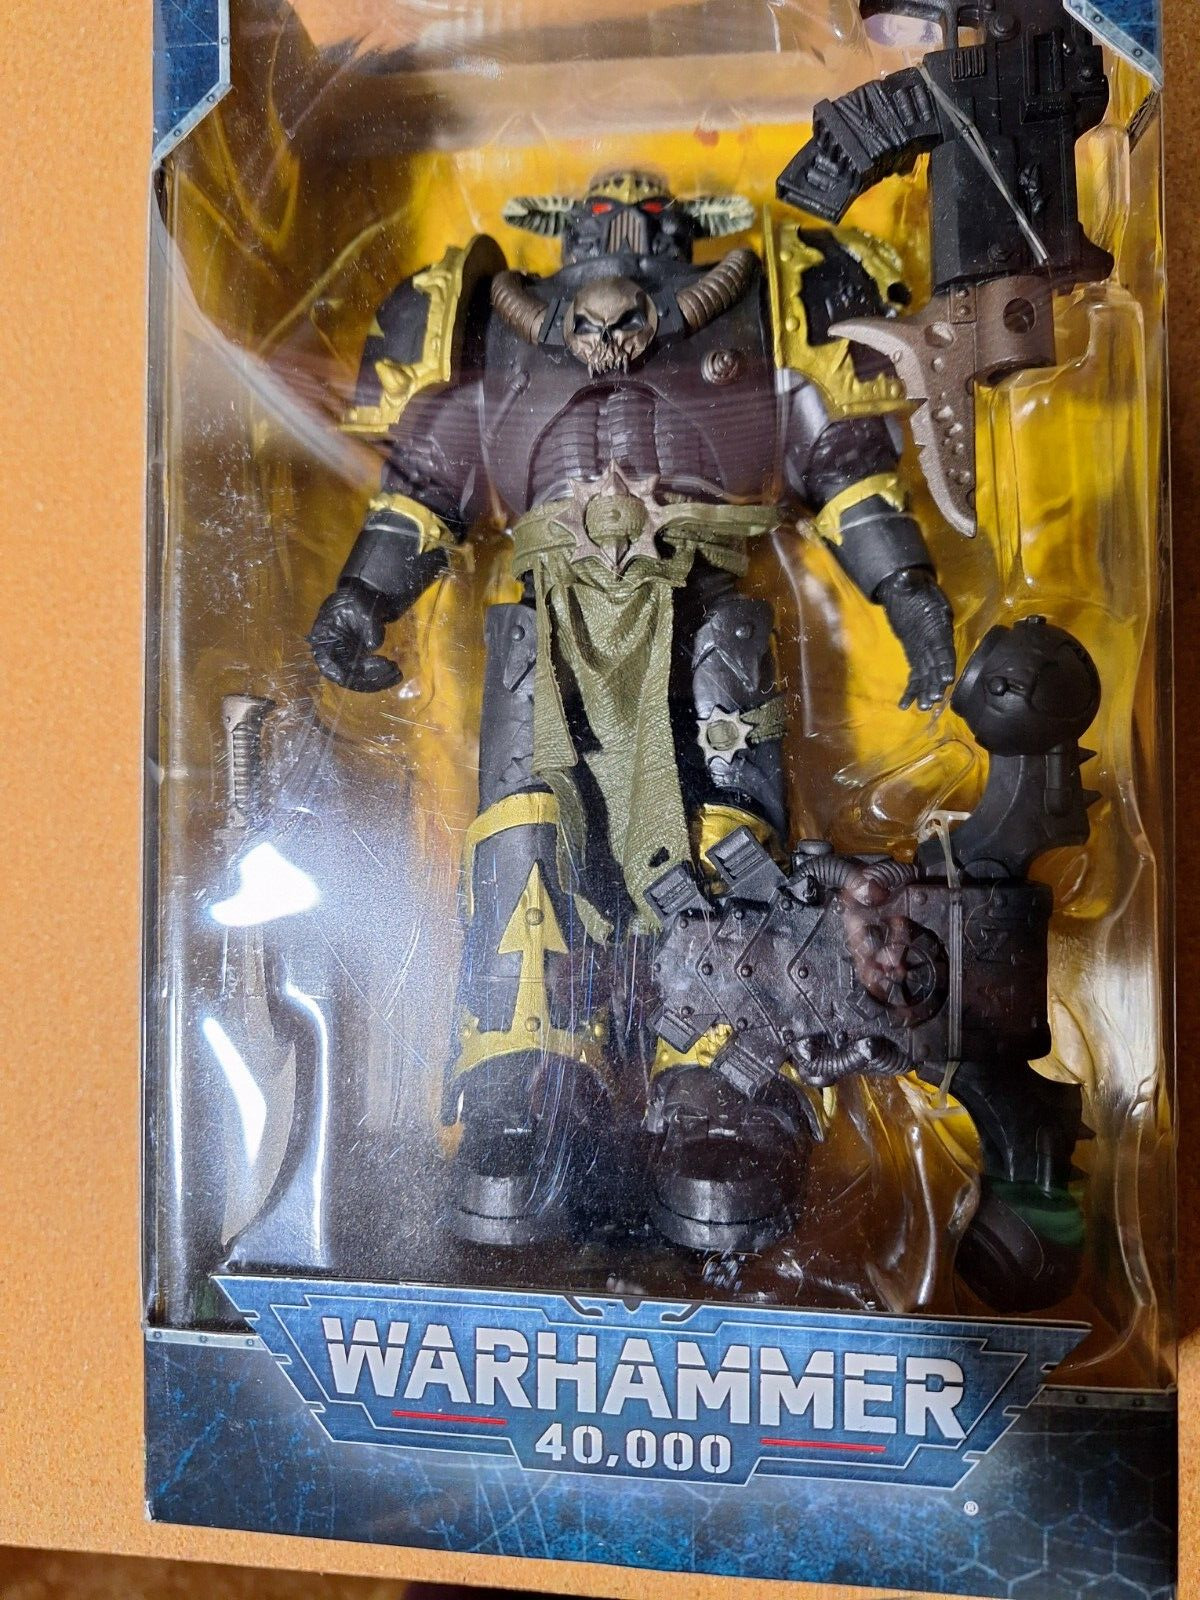 McFarlane Toys Warhammer 40,000 Chaos Space Marine 7 in Action Figure - 10941